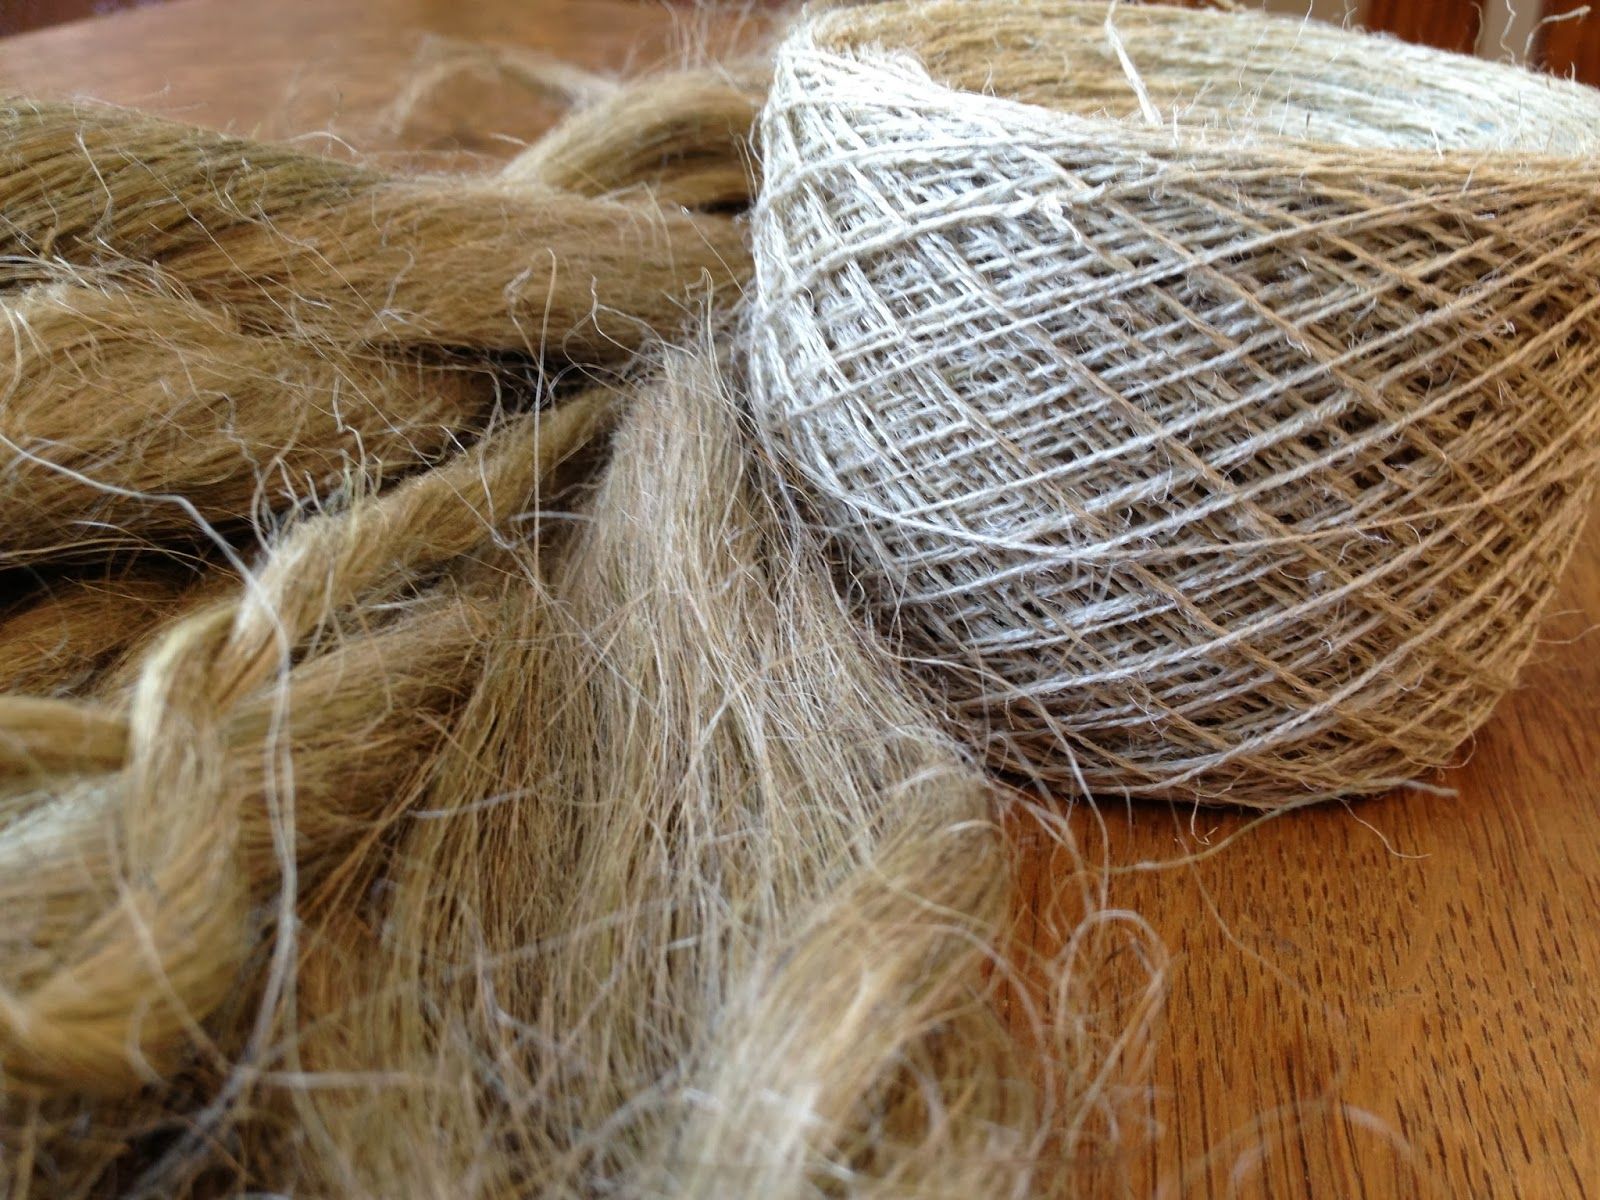 Linen – getting to know this beautiful flax fibre better